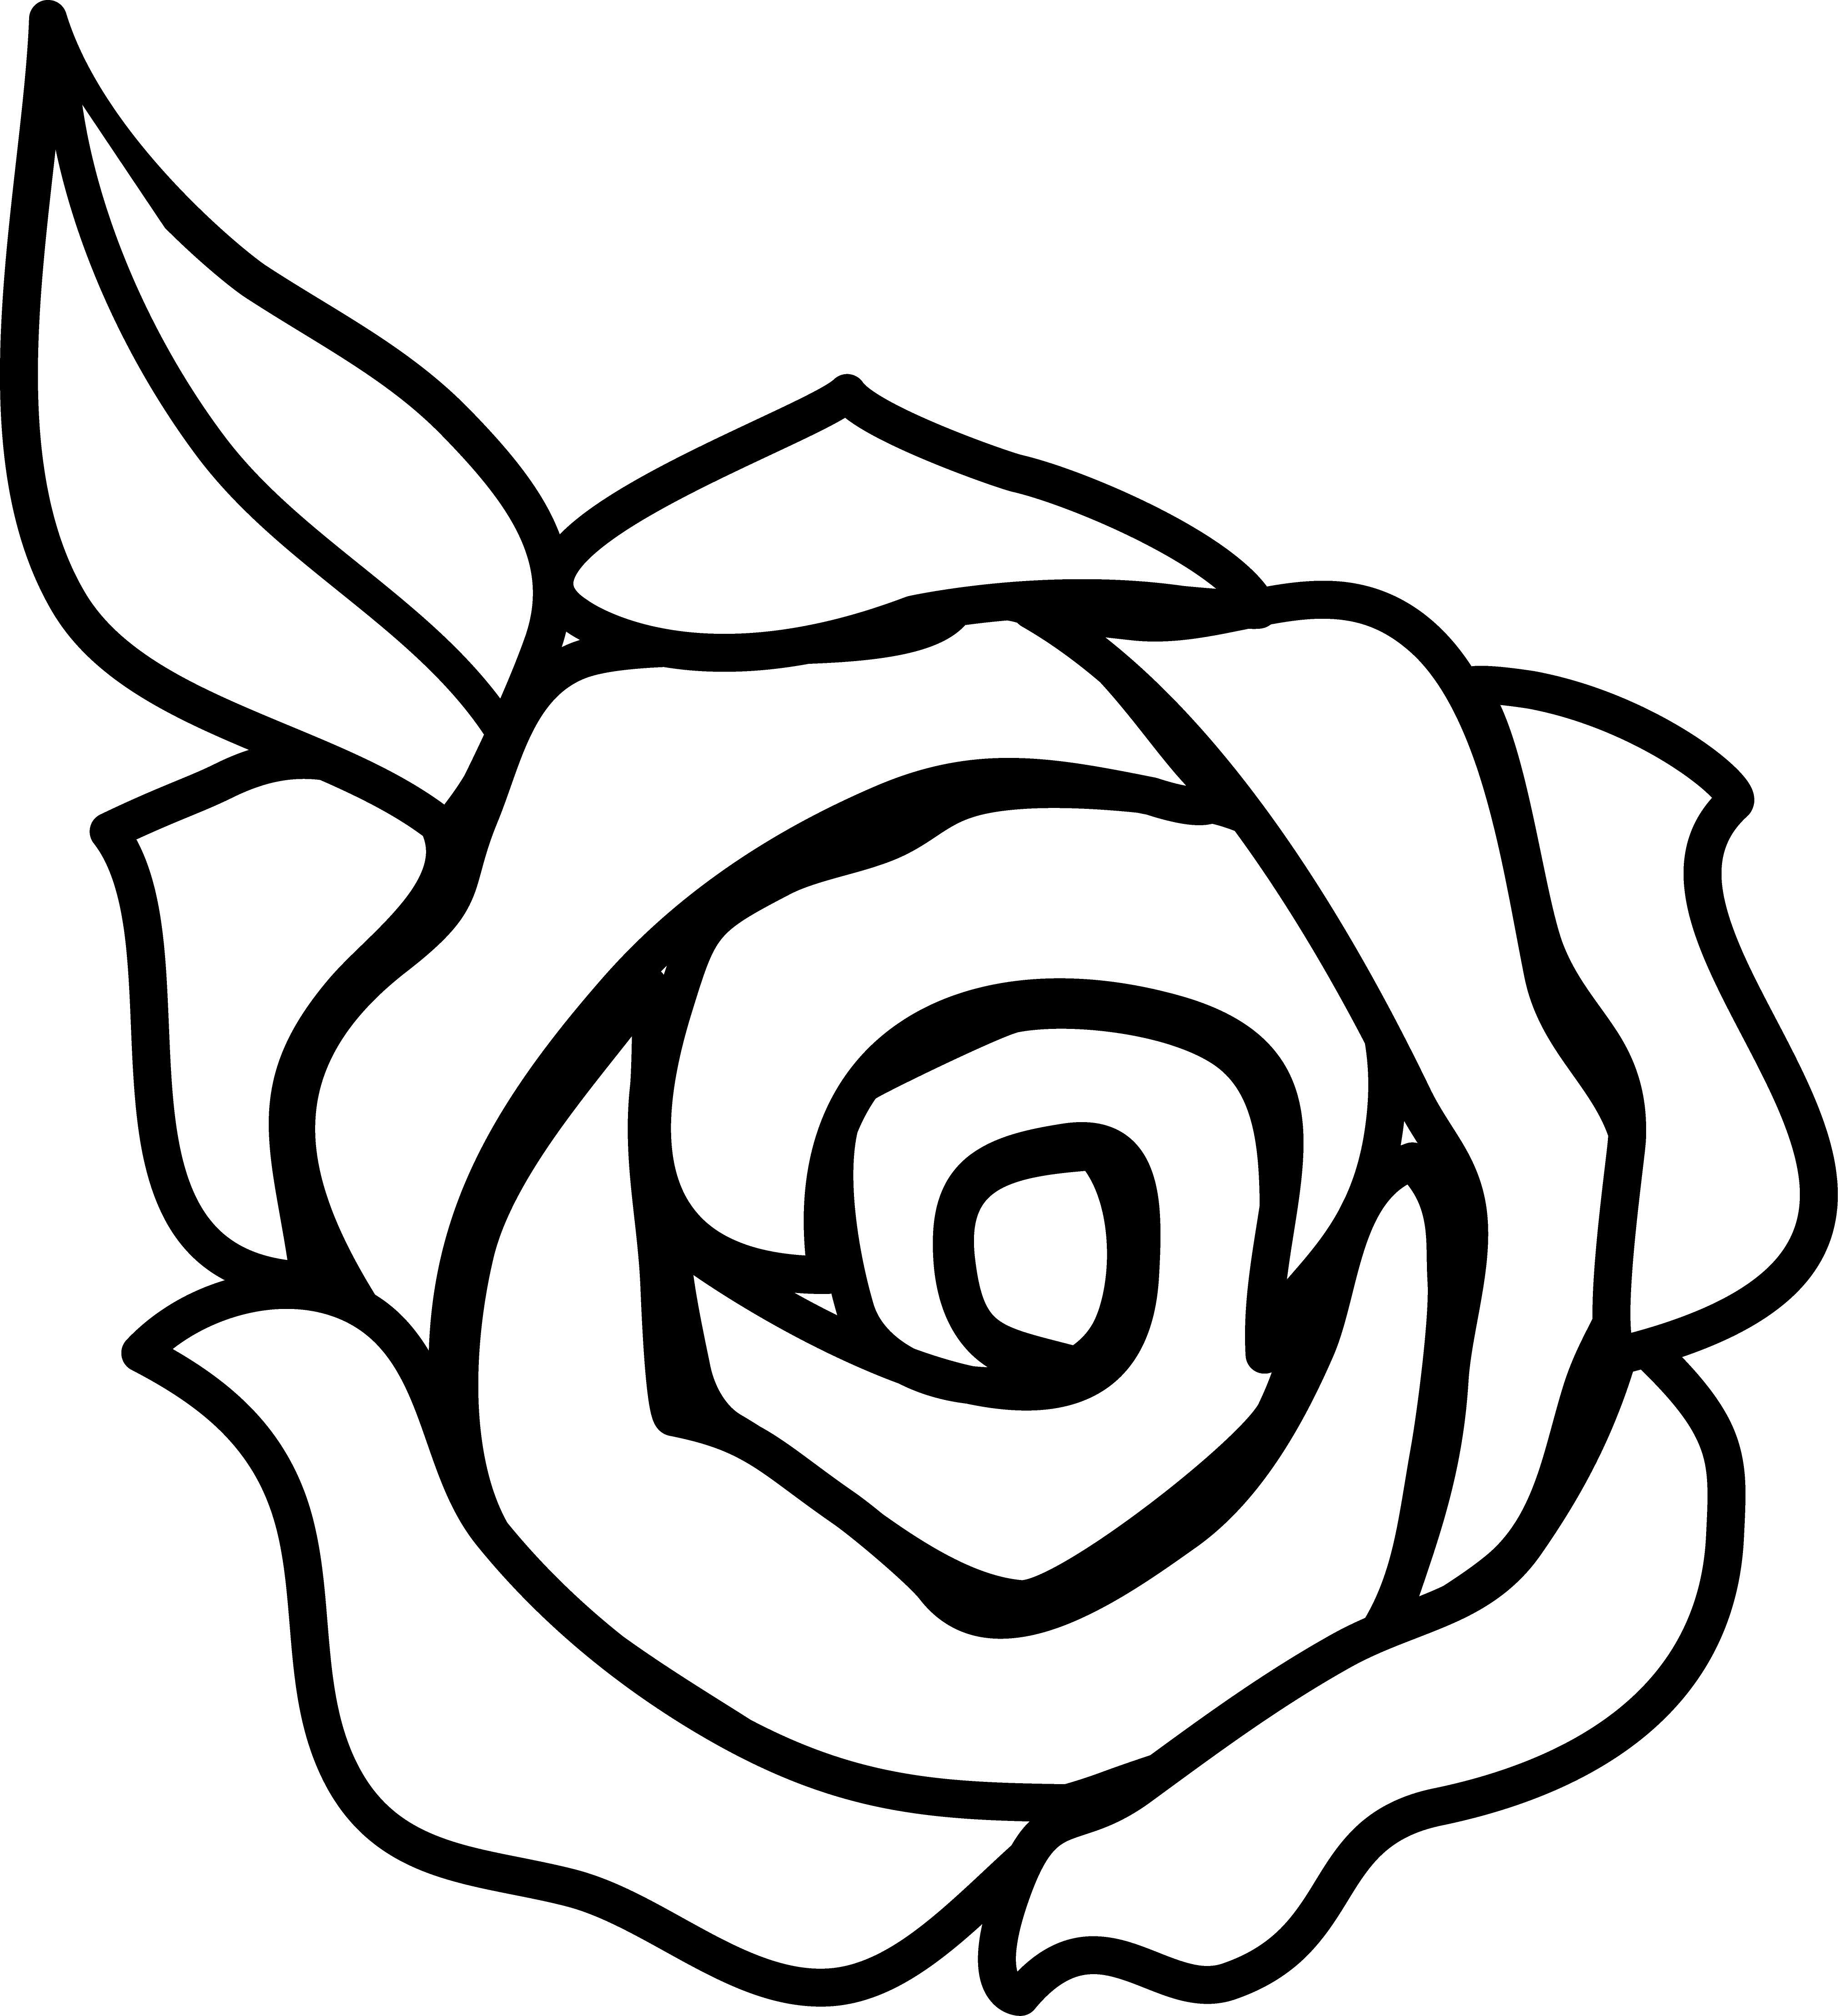 Black And White Rose Border Clip Art | Clipart library - Free 